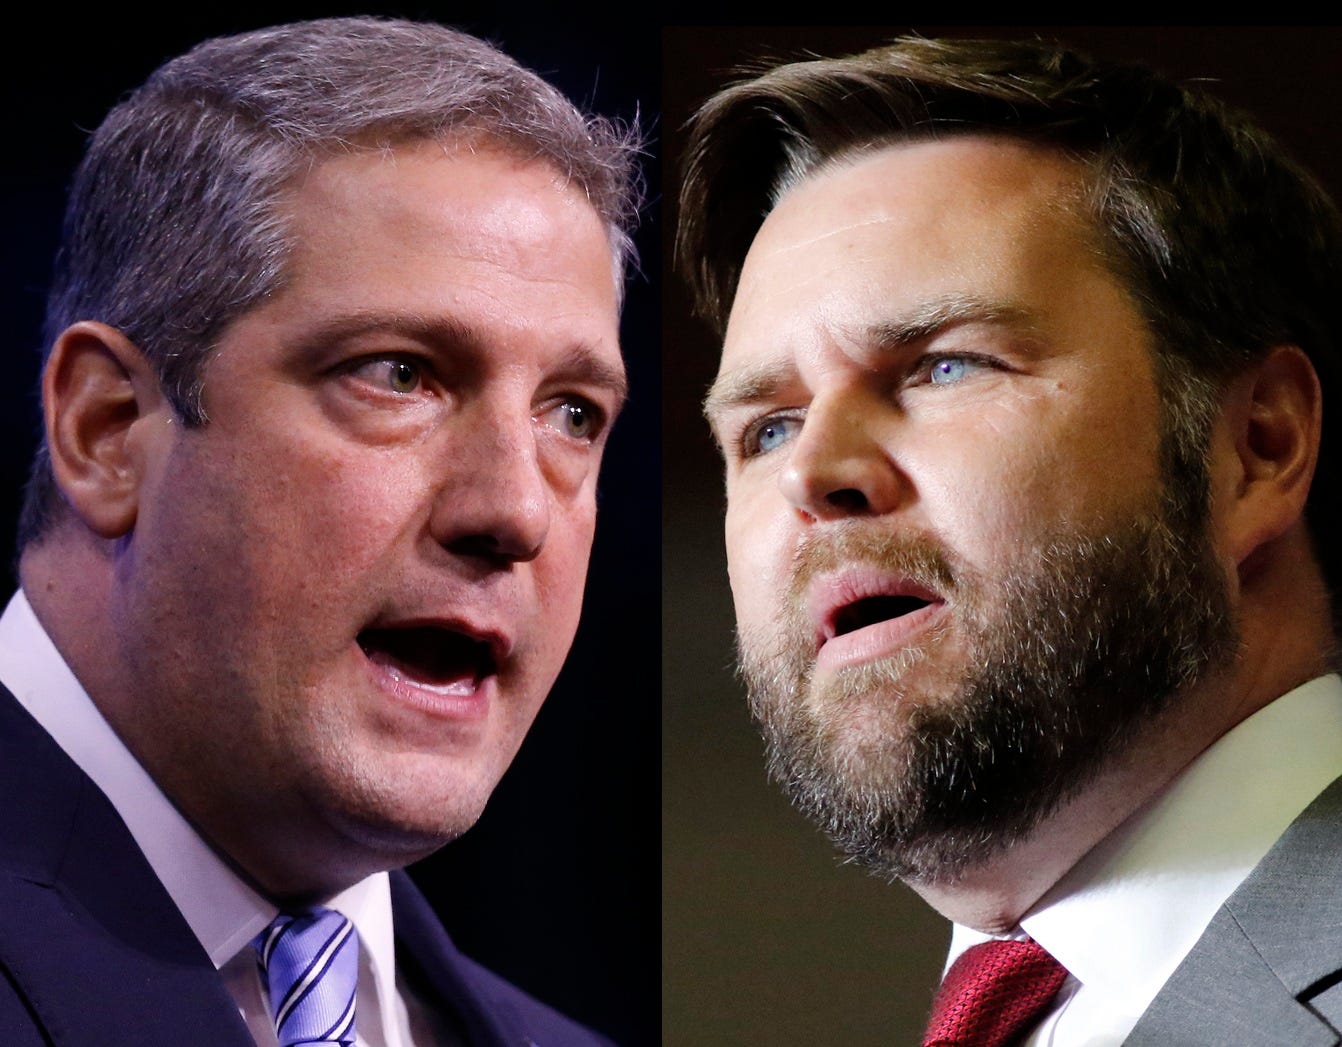 J.D. Vance and Tim Ryan town to watch